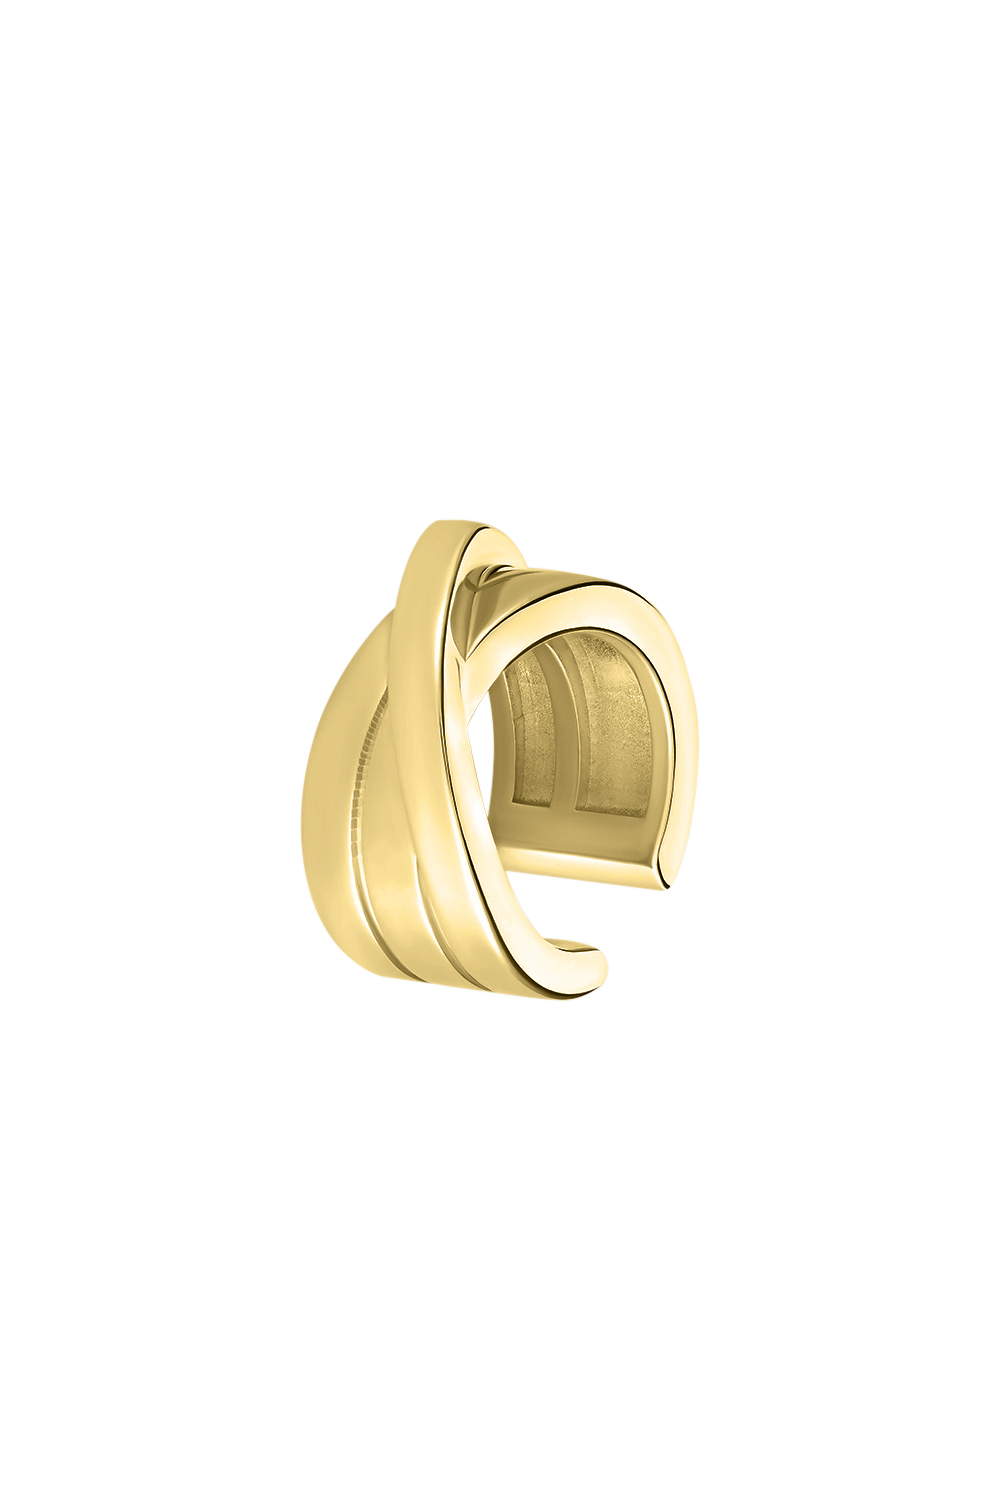 WOUND-ON EARCUFF YELLOW GOLD PLATED